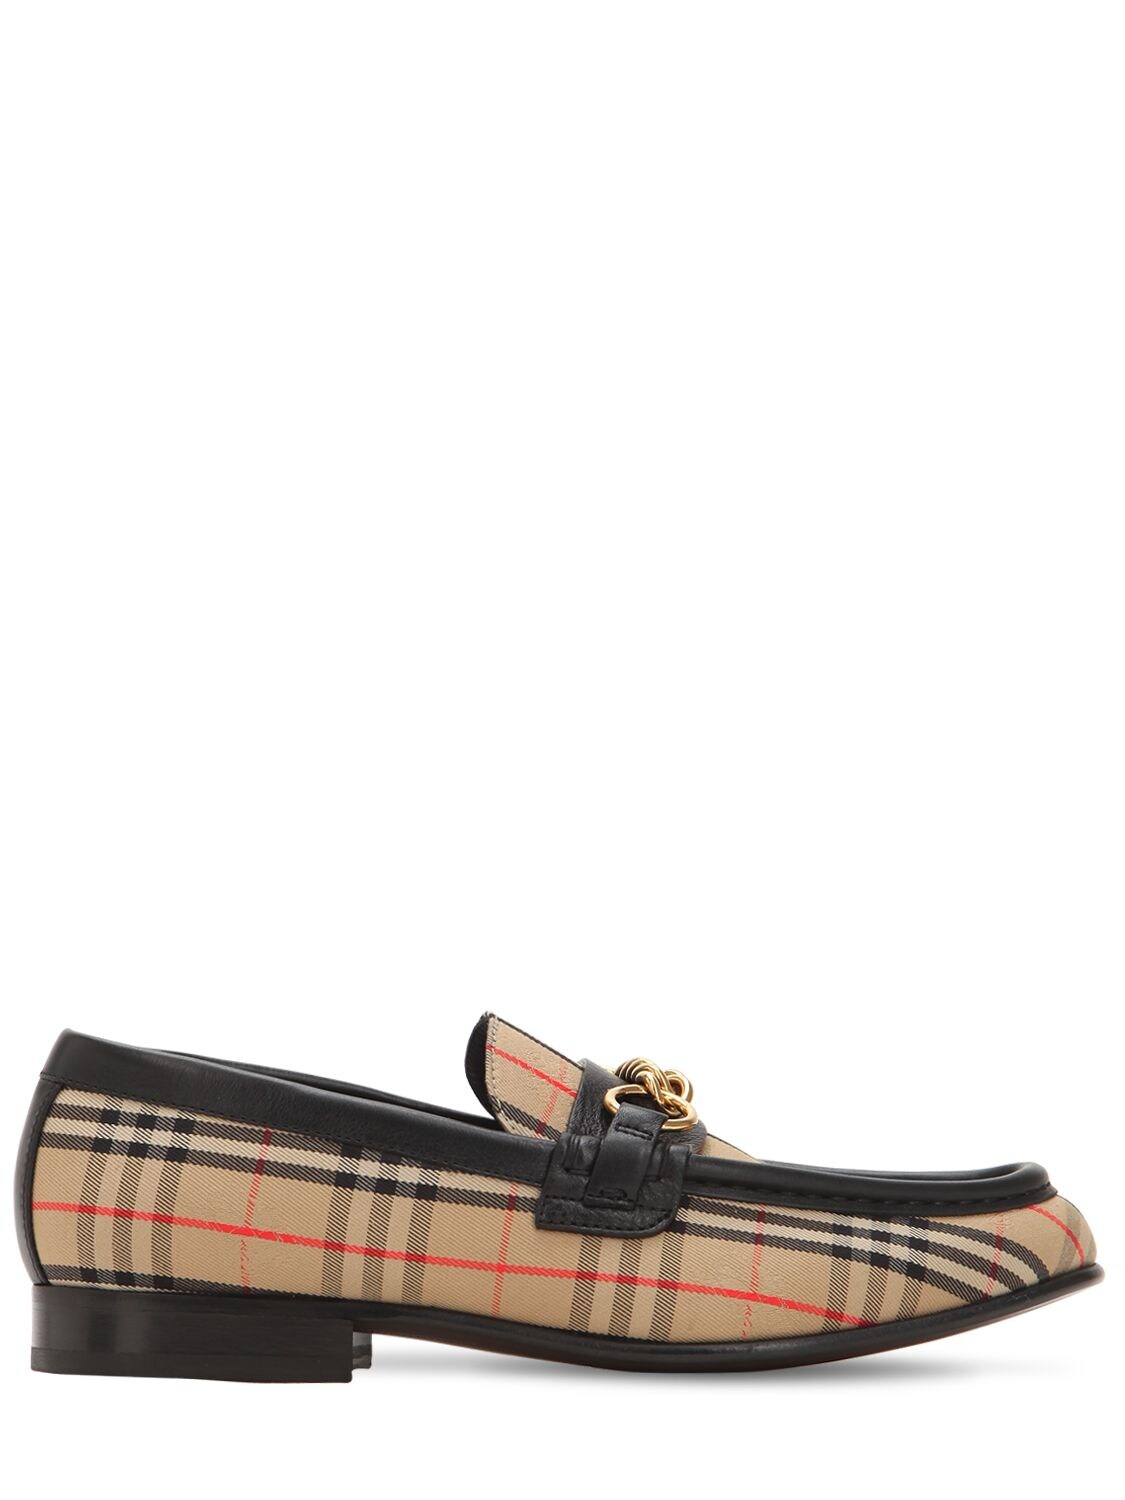 BURBERRY 10MM MOORLEY CHECK & LEATHER LOAFERS,69IG4S009-QTEXODK1